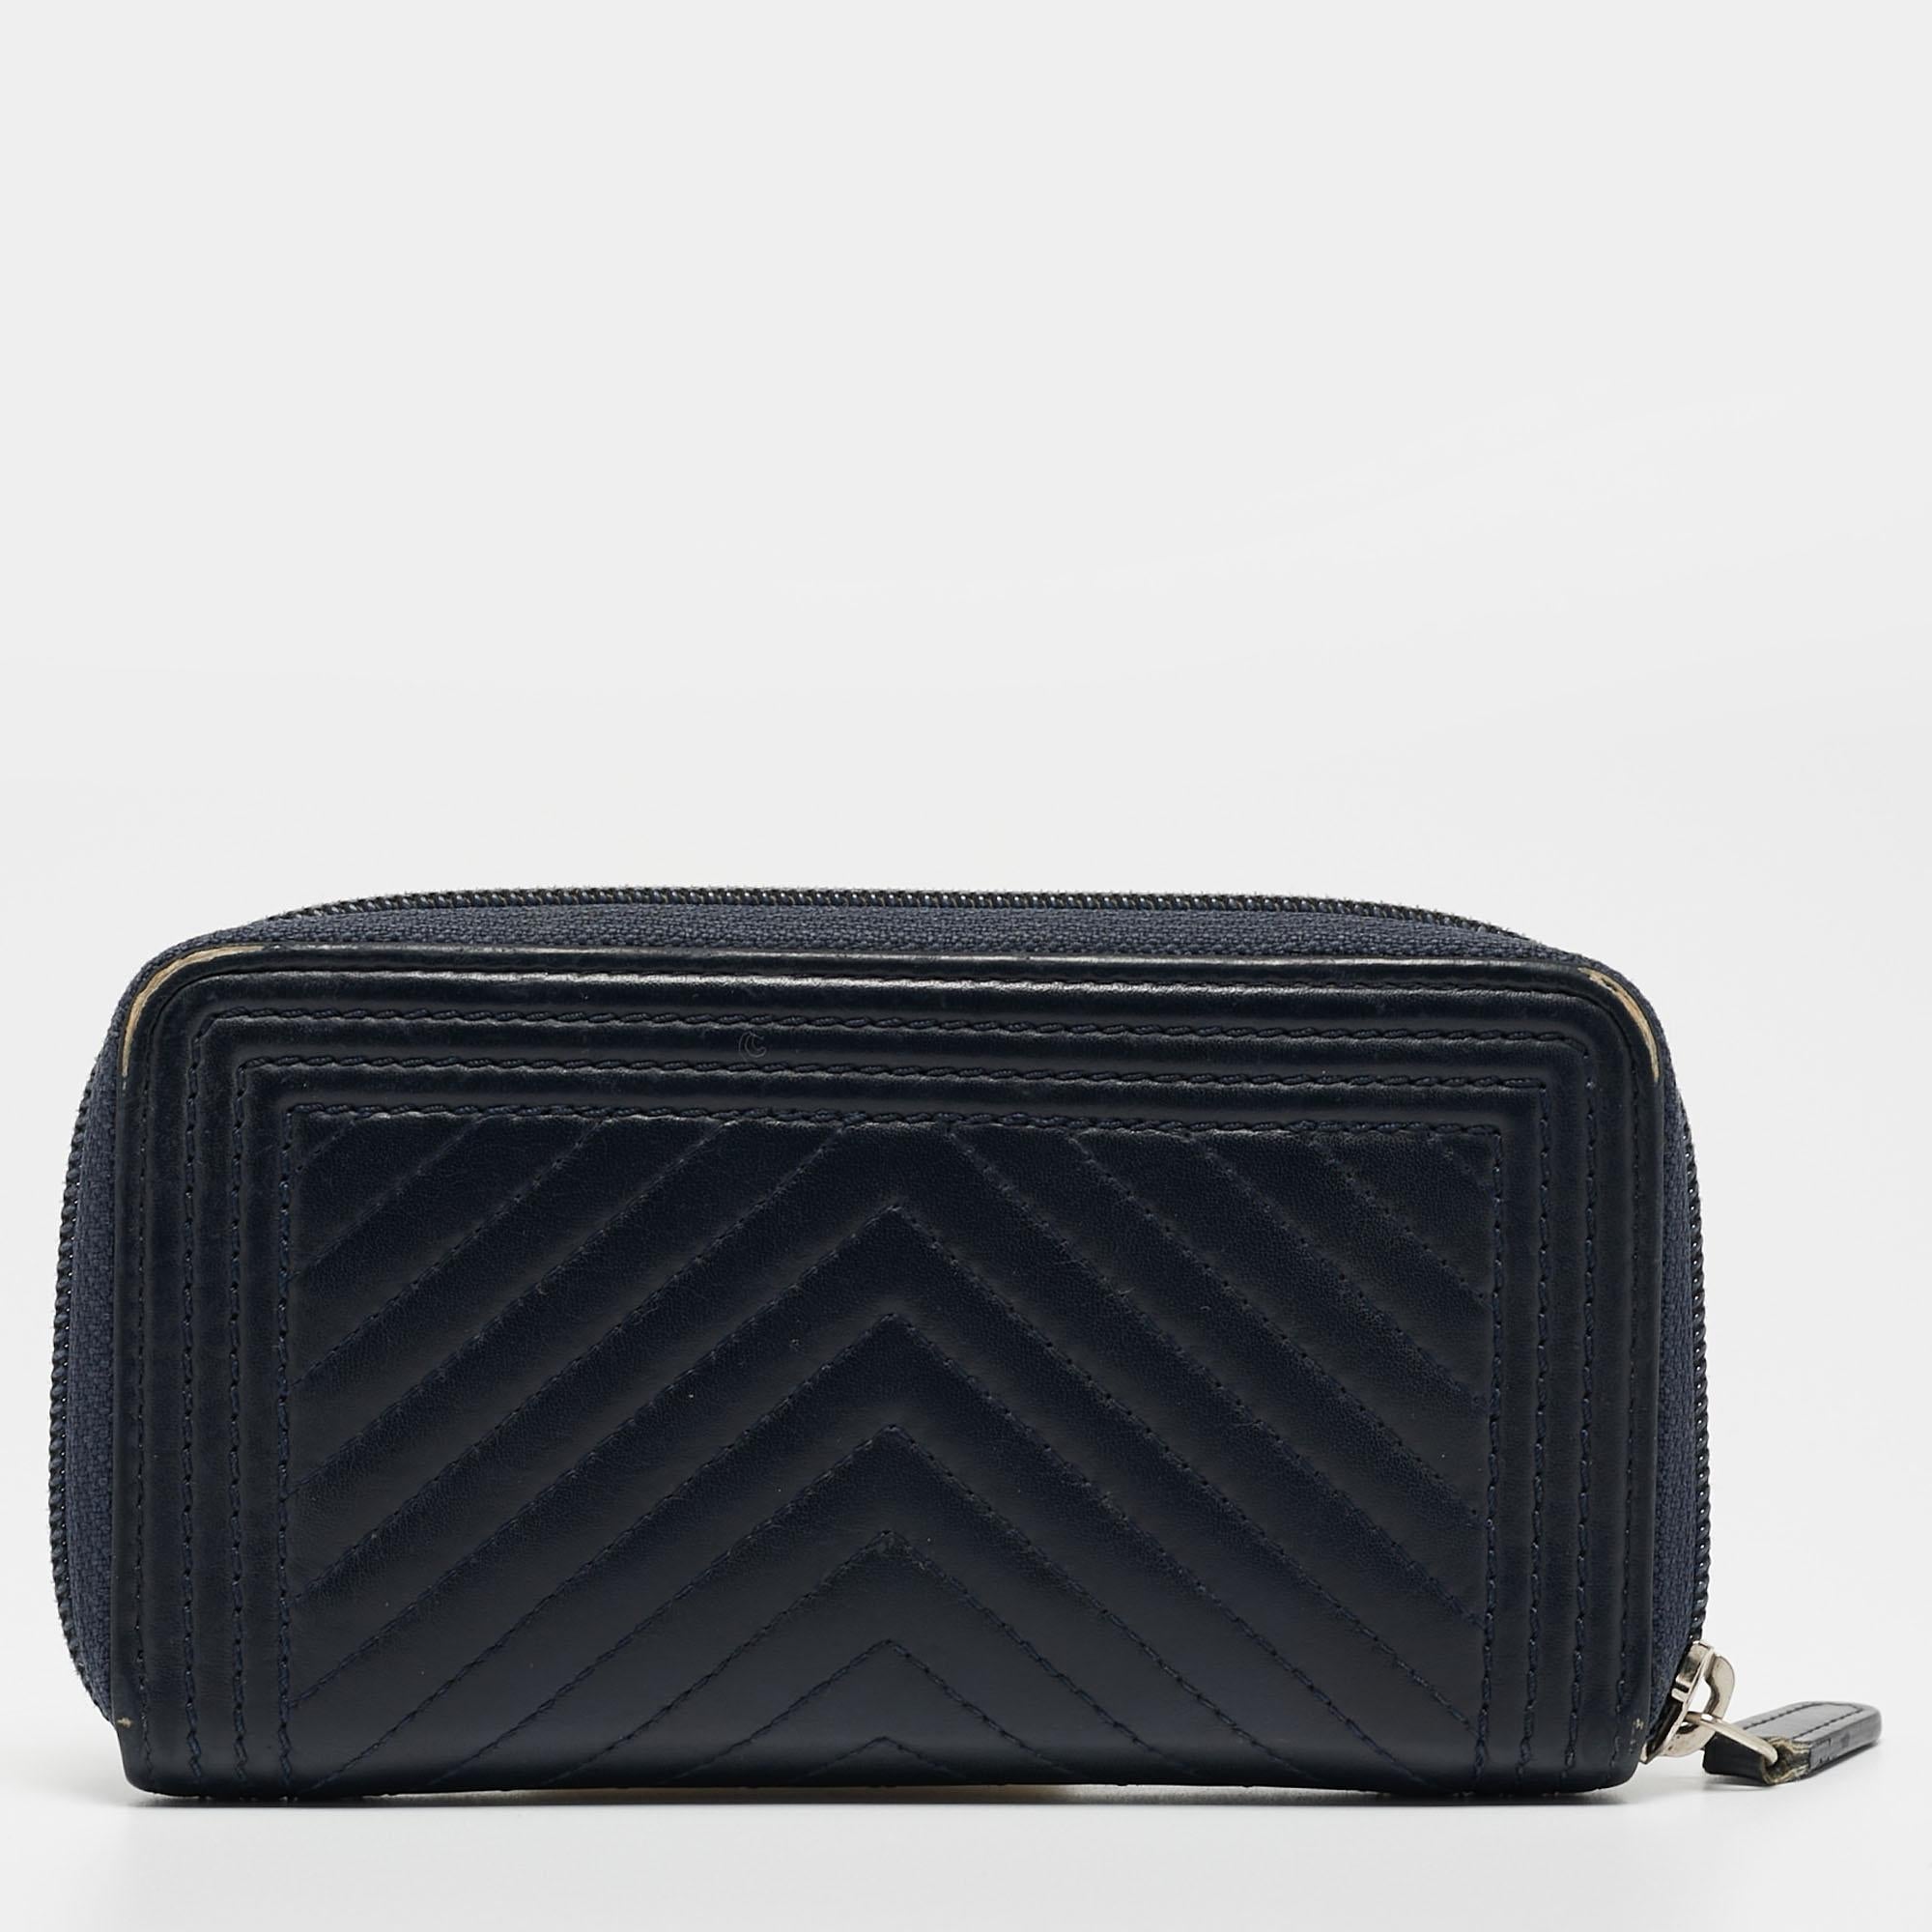 Every woman deserves to have a Chanel wallet in her collection. Crafted from chevron leather the bag features the iconic boy CC logo. The zip around wallet opens to a leather and nylon lined interior that houses compartments for currency and bills